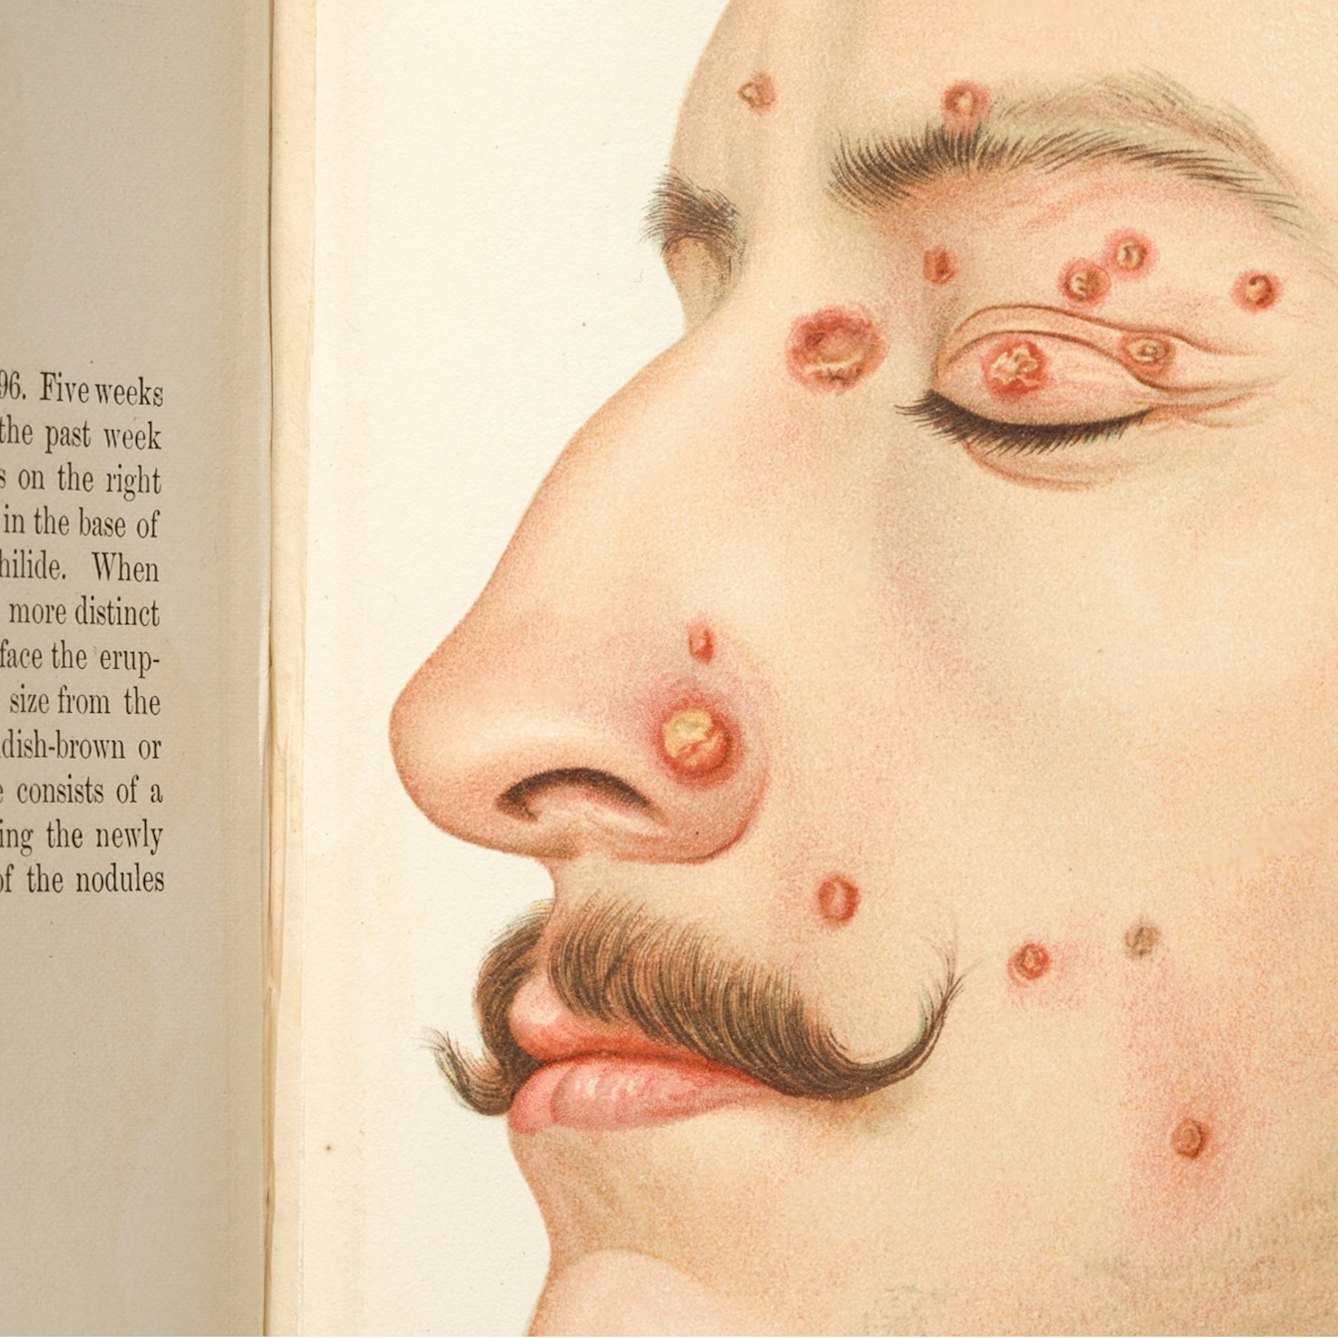 Photograph of an illustration in a book showing a man's face with evidence of syphilis, in the form of red pustules.